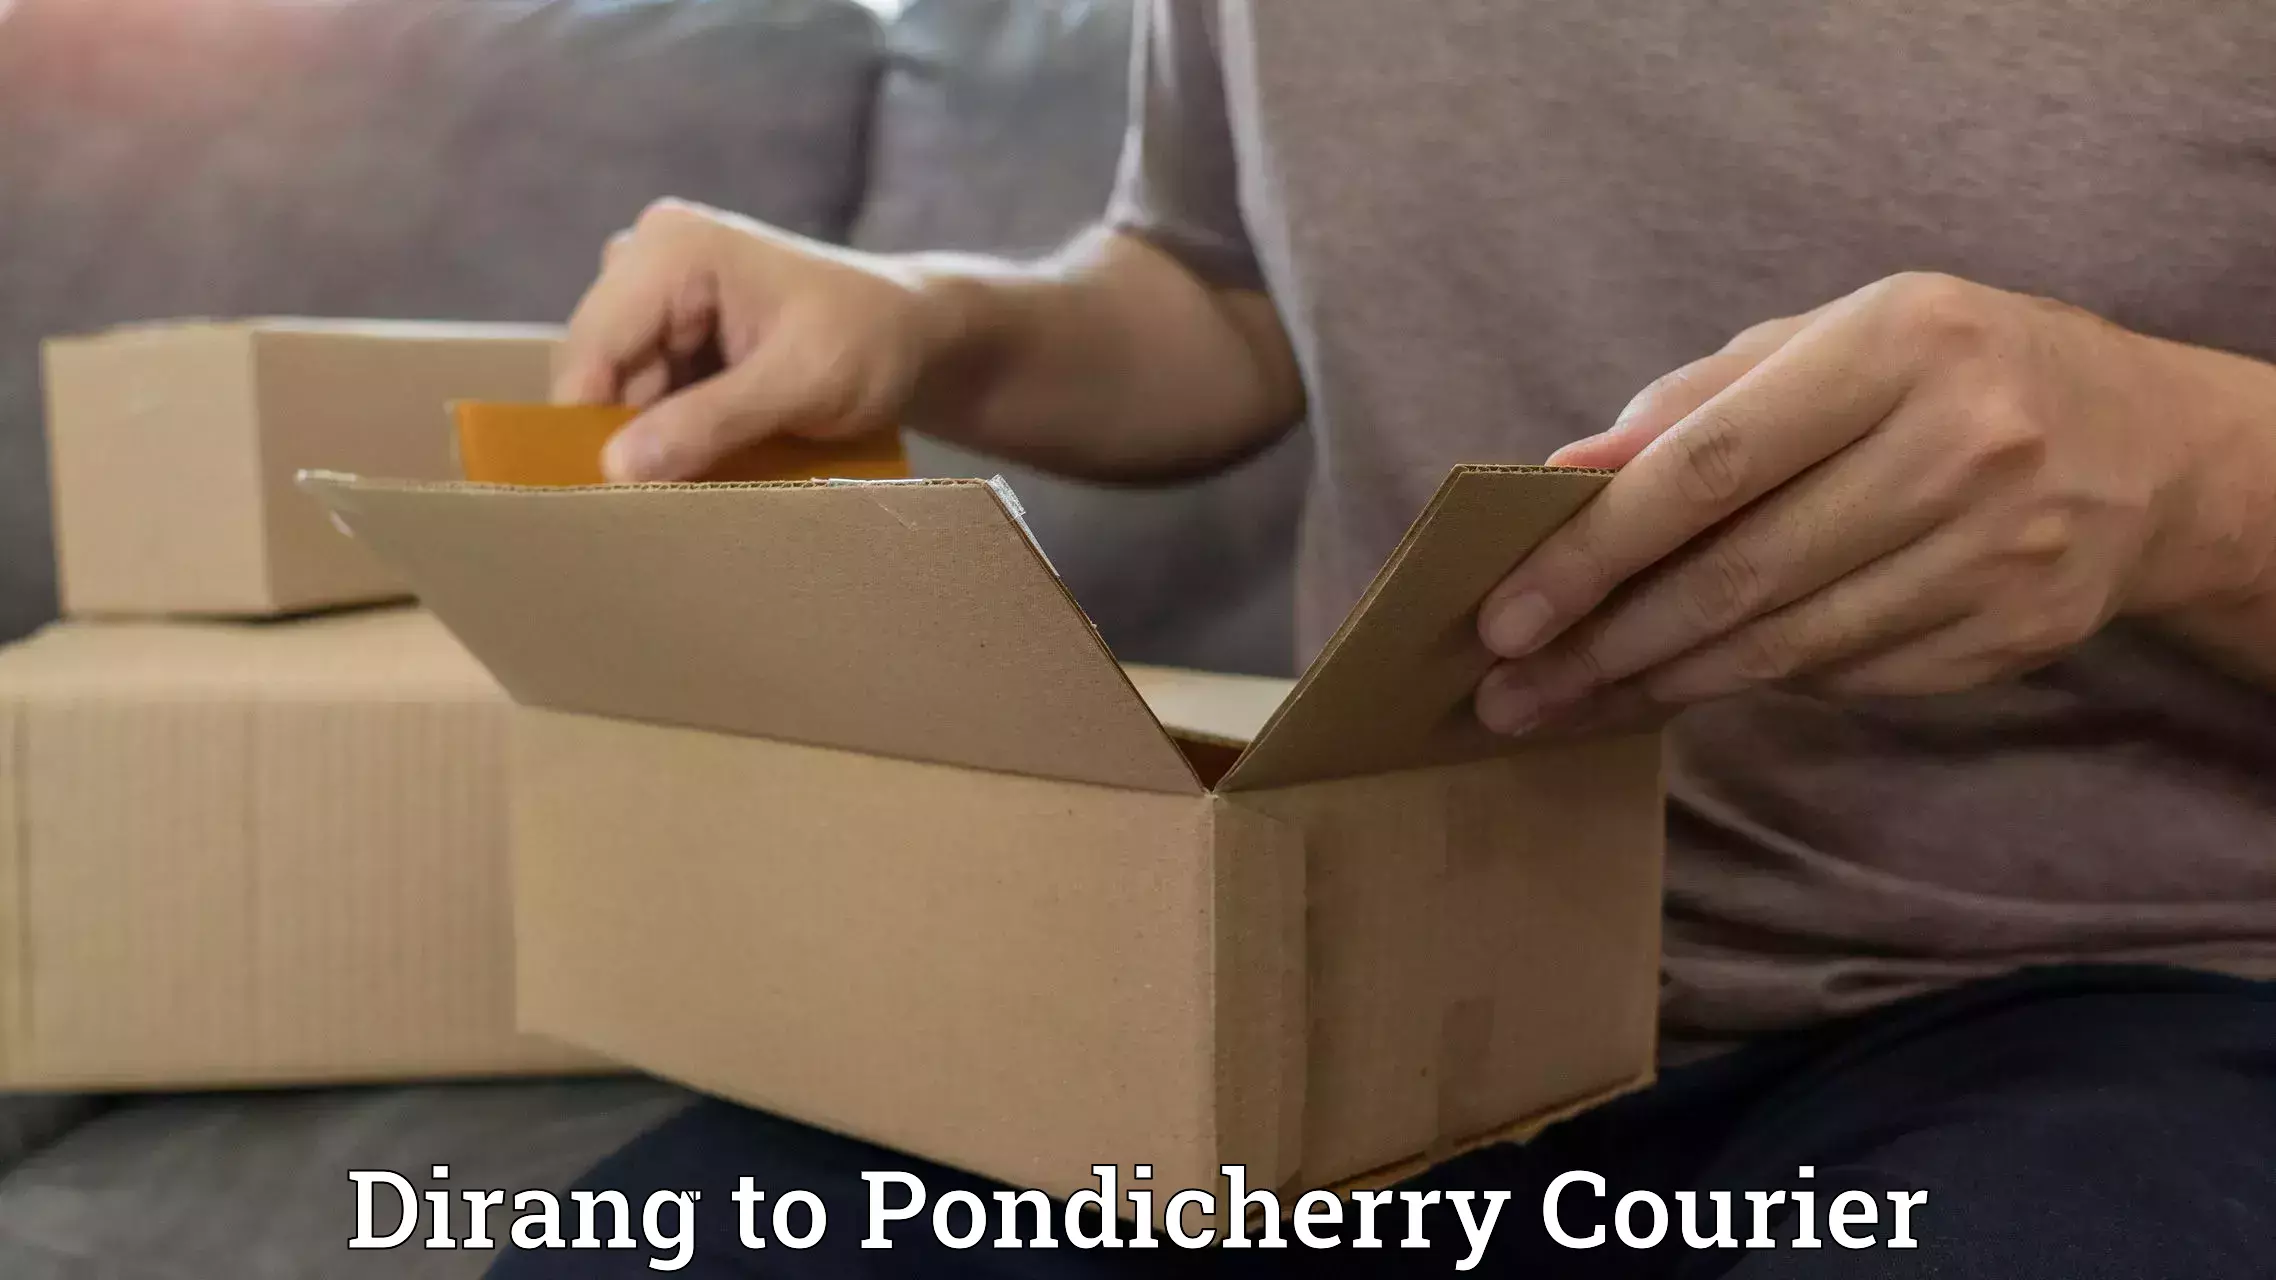 Enhanced delivery experience Dirang to Pondicherry